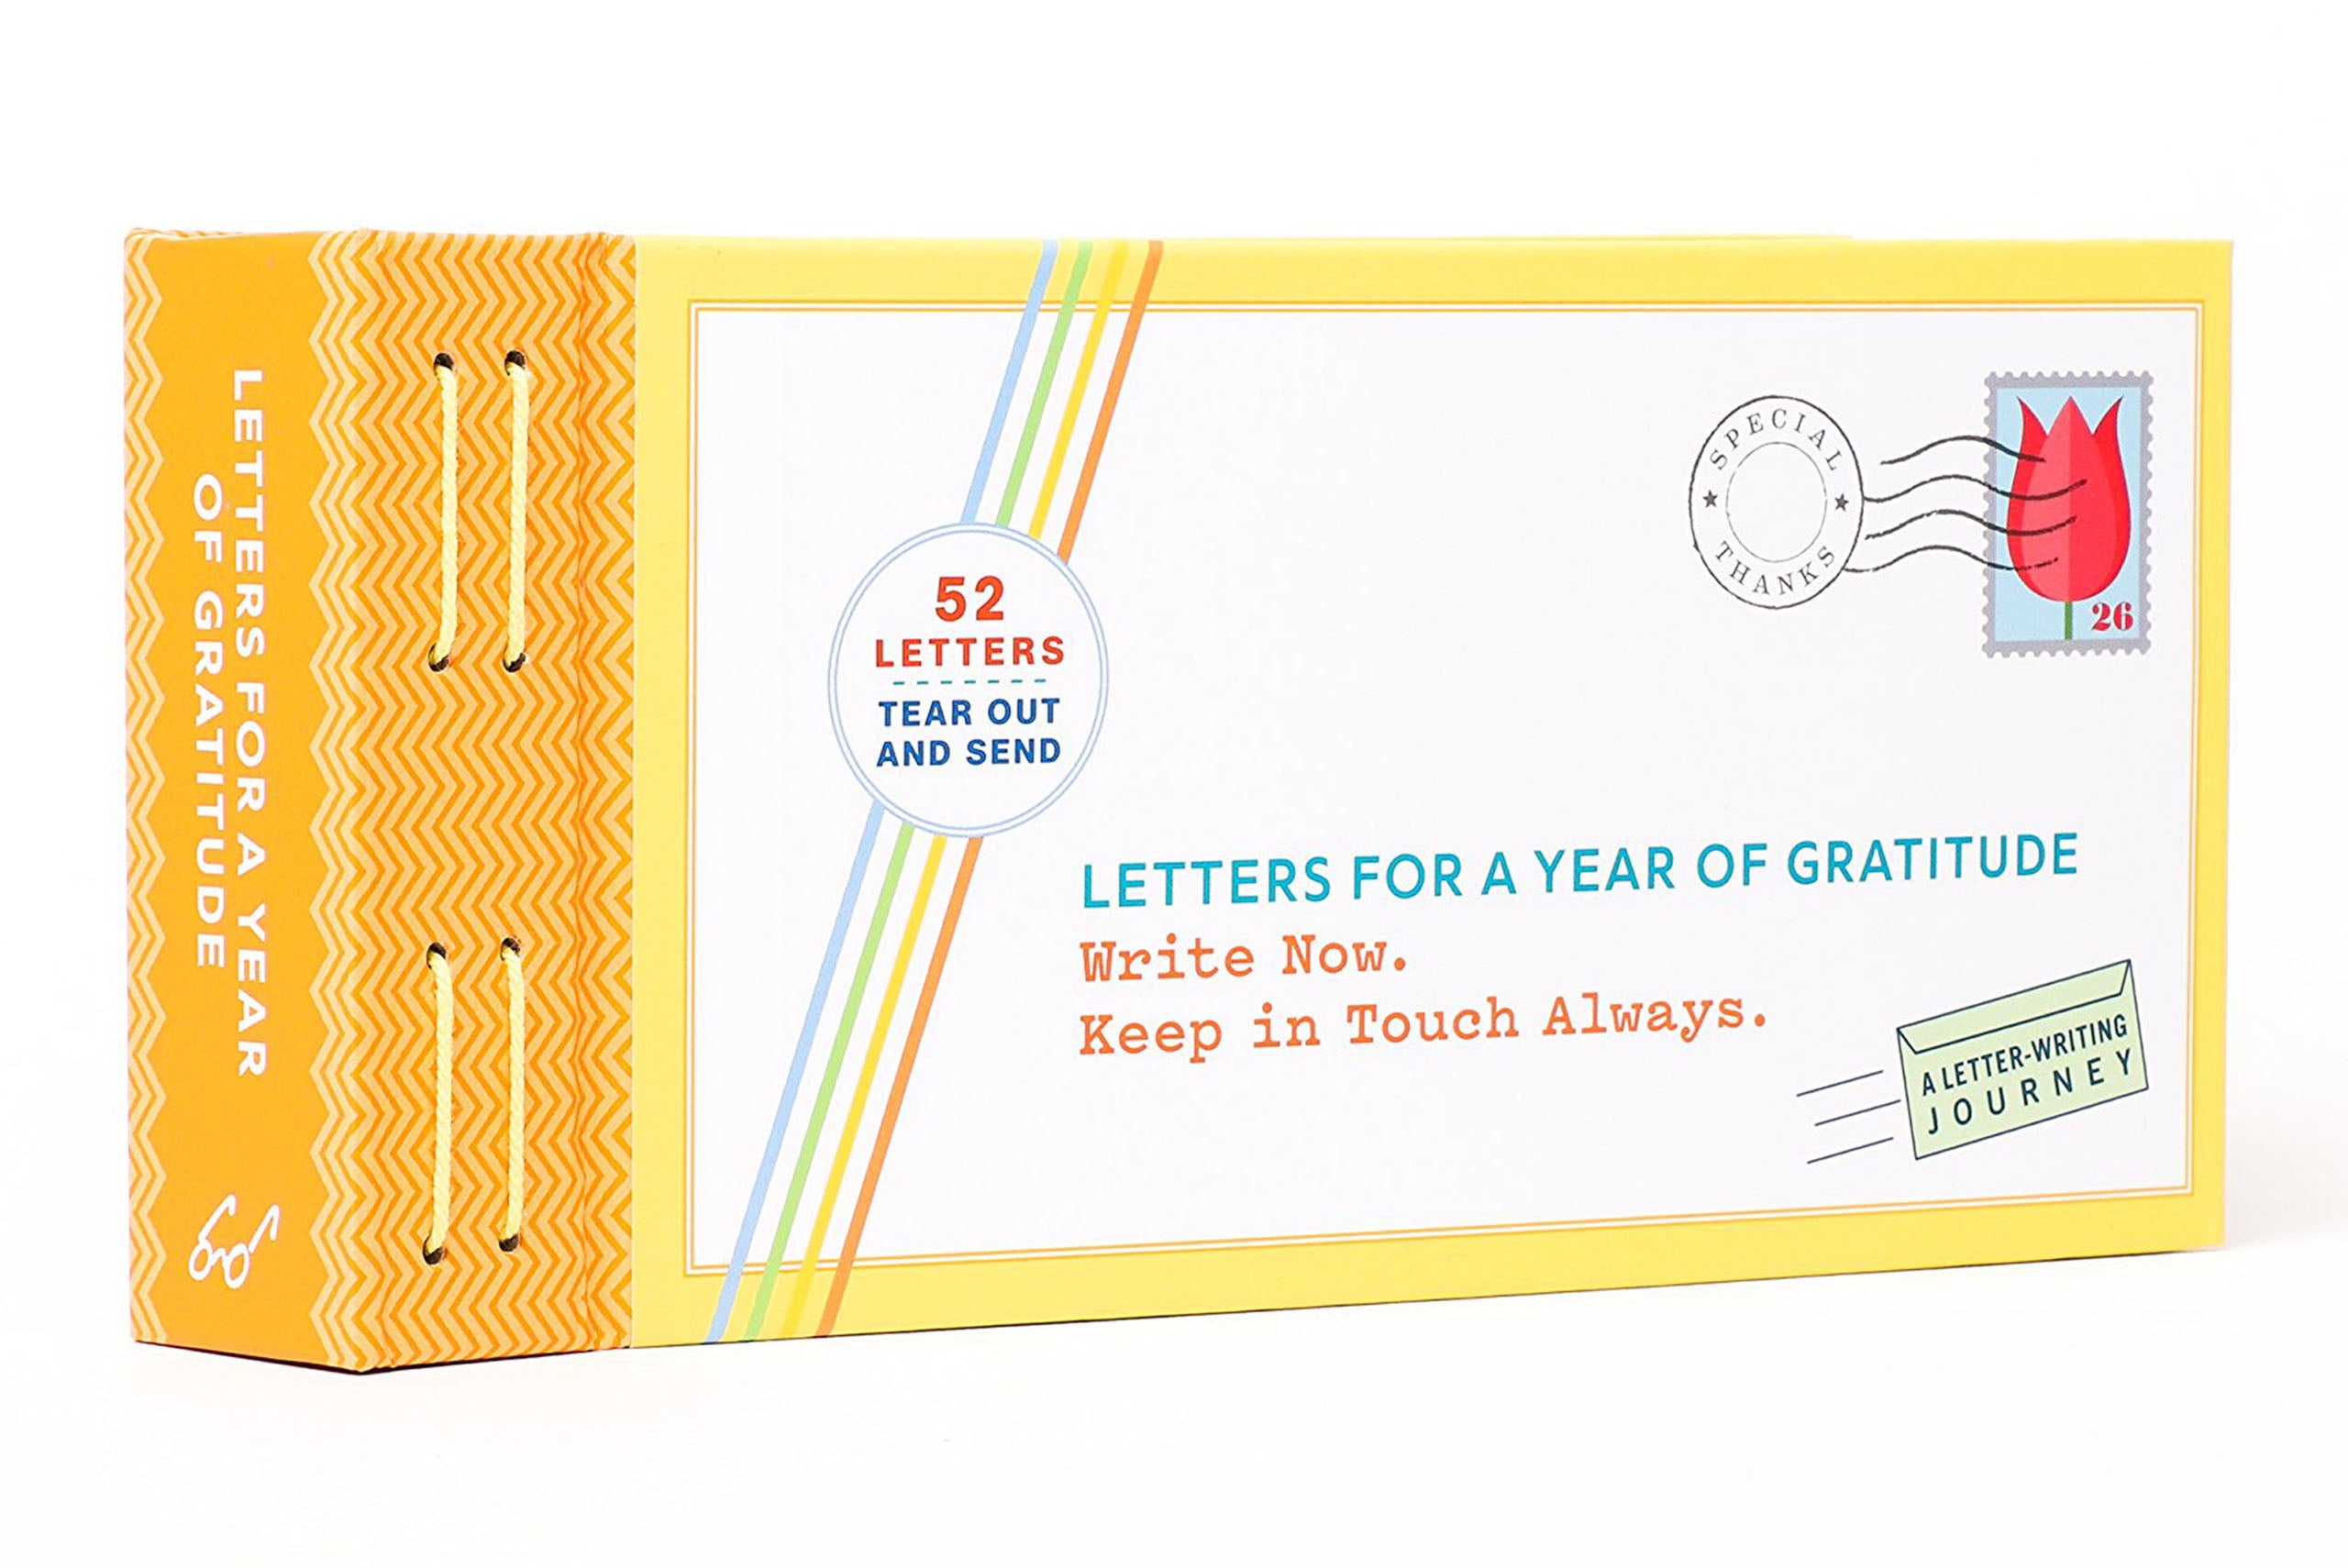 Letters for a year of gratitude